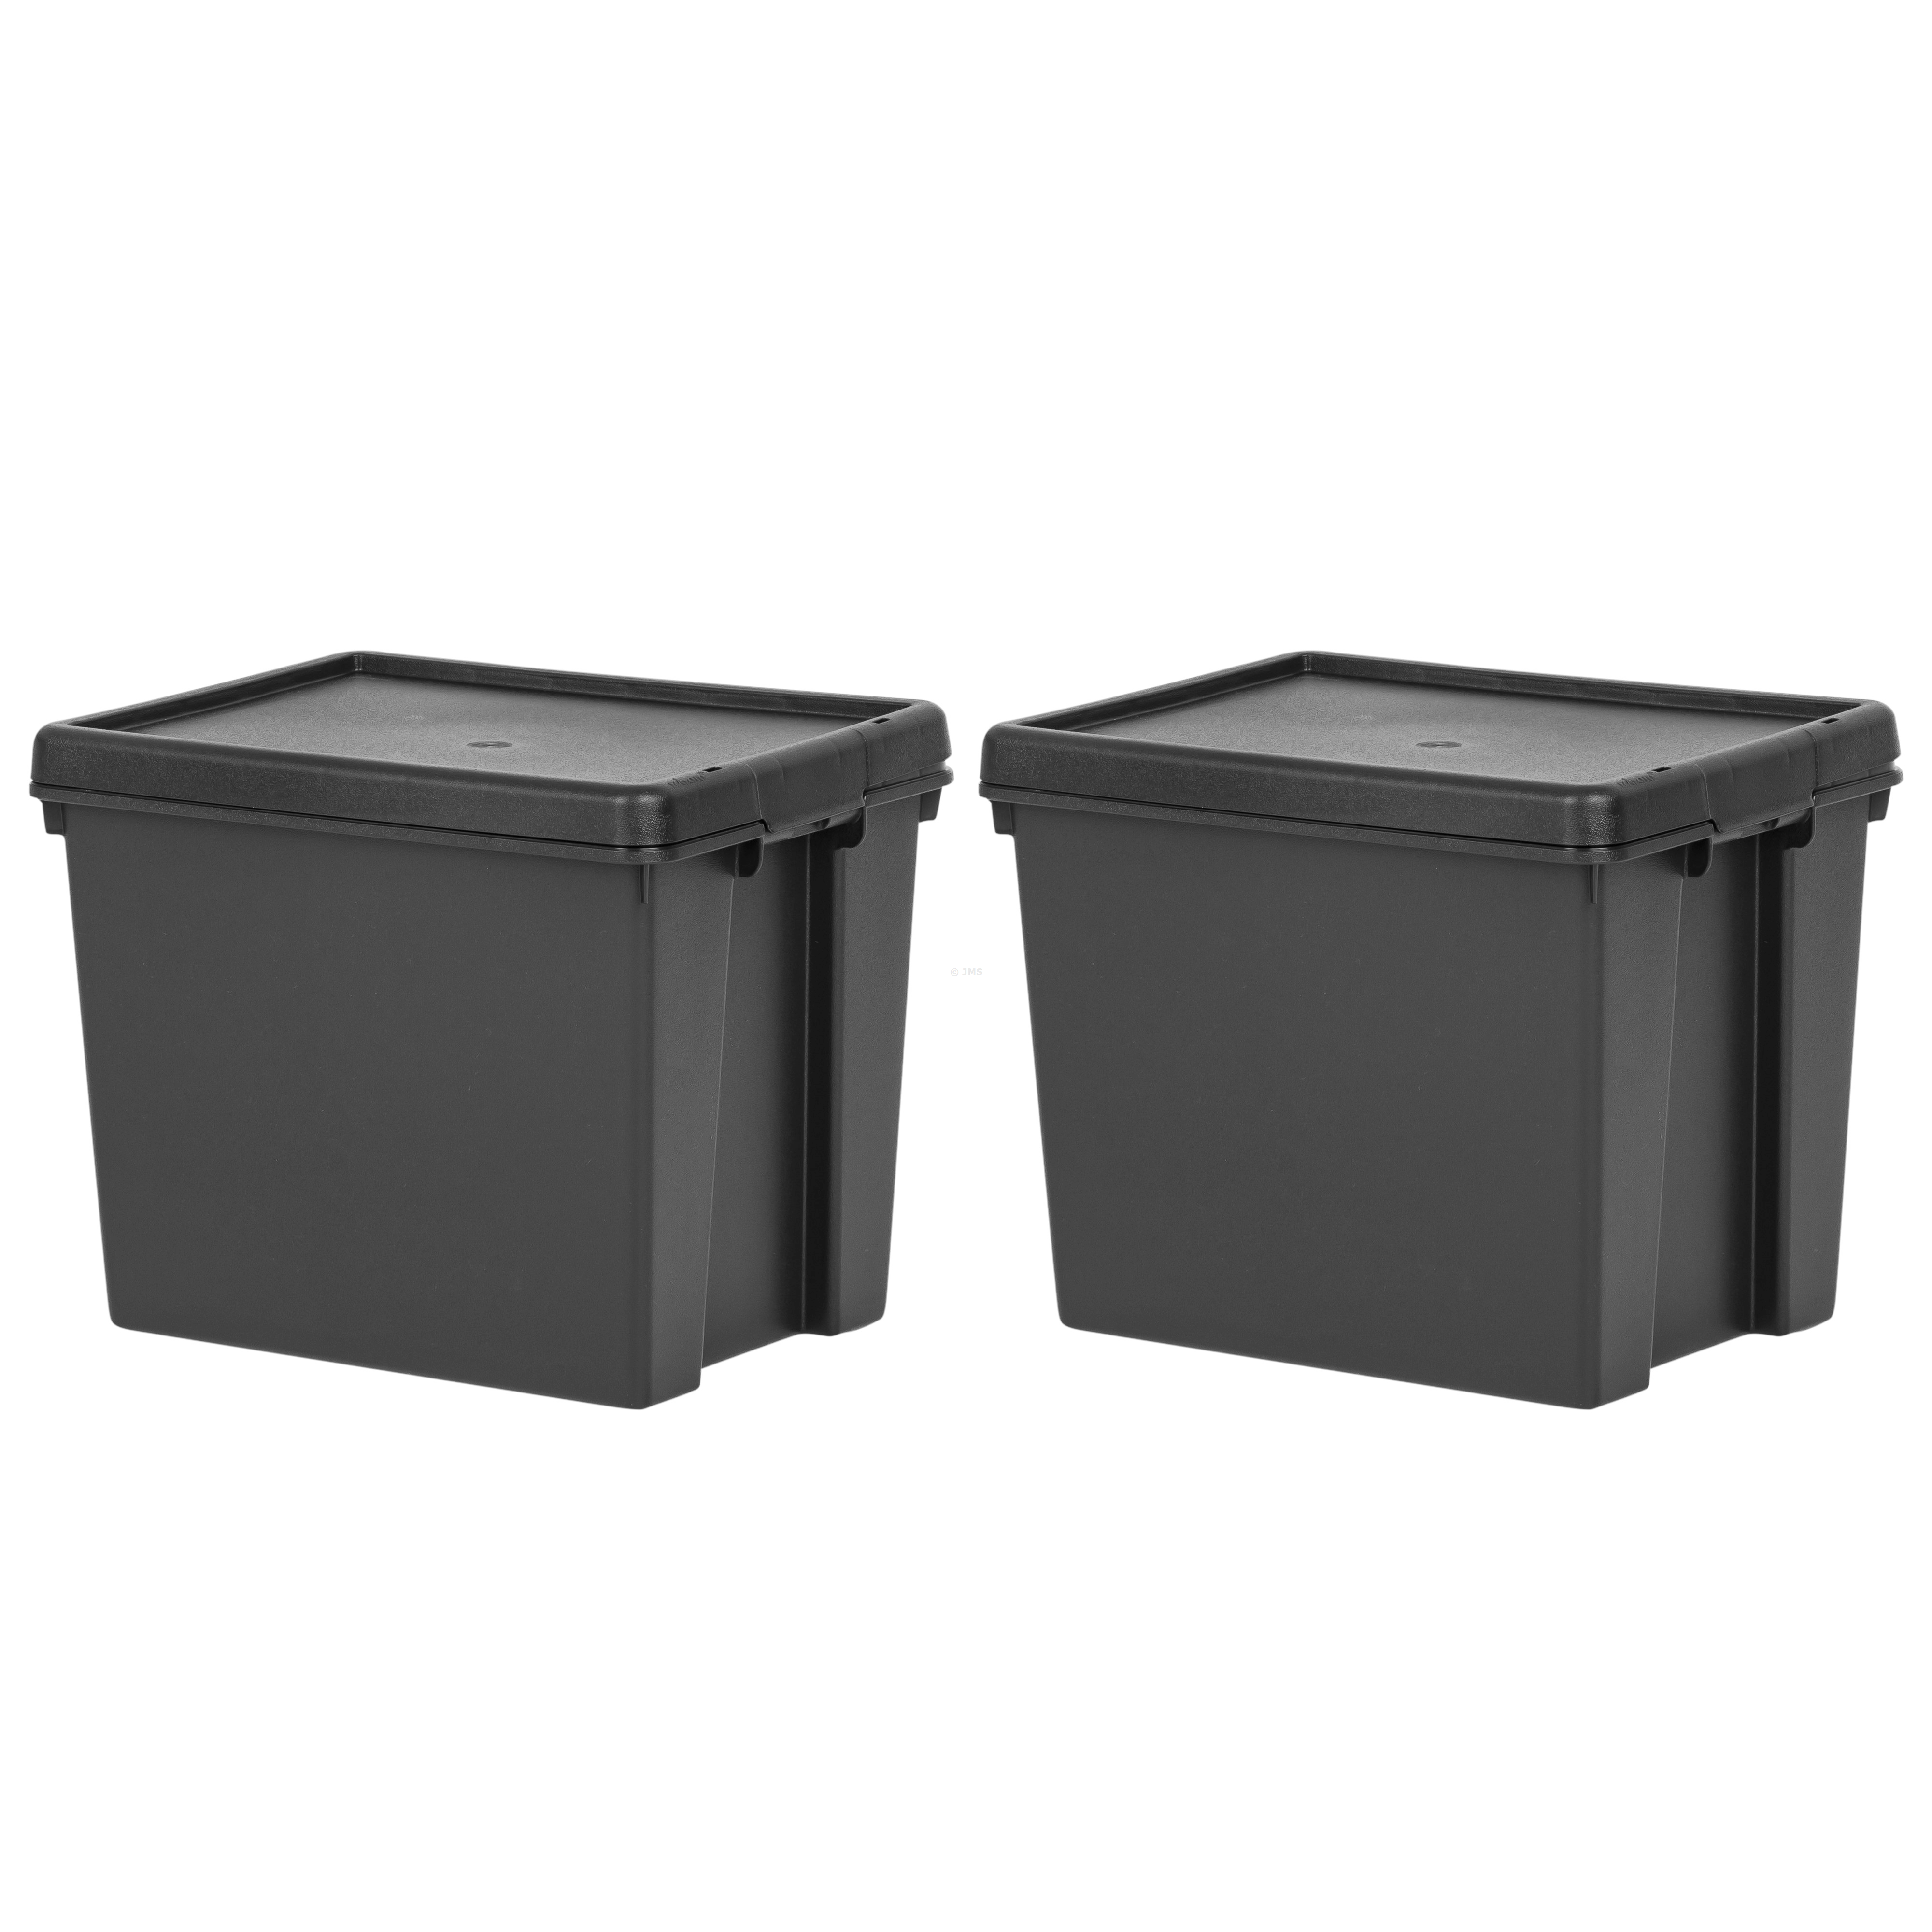 [Set of 2] Recycled Plastic 24L Black Storage Box with Lid Heavy Duty Stackable Nestable Containers Home Office Garage Toolbox